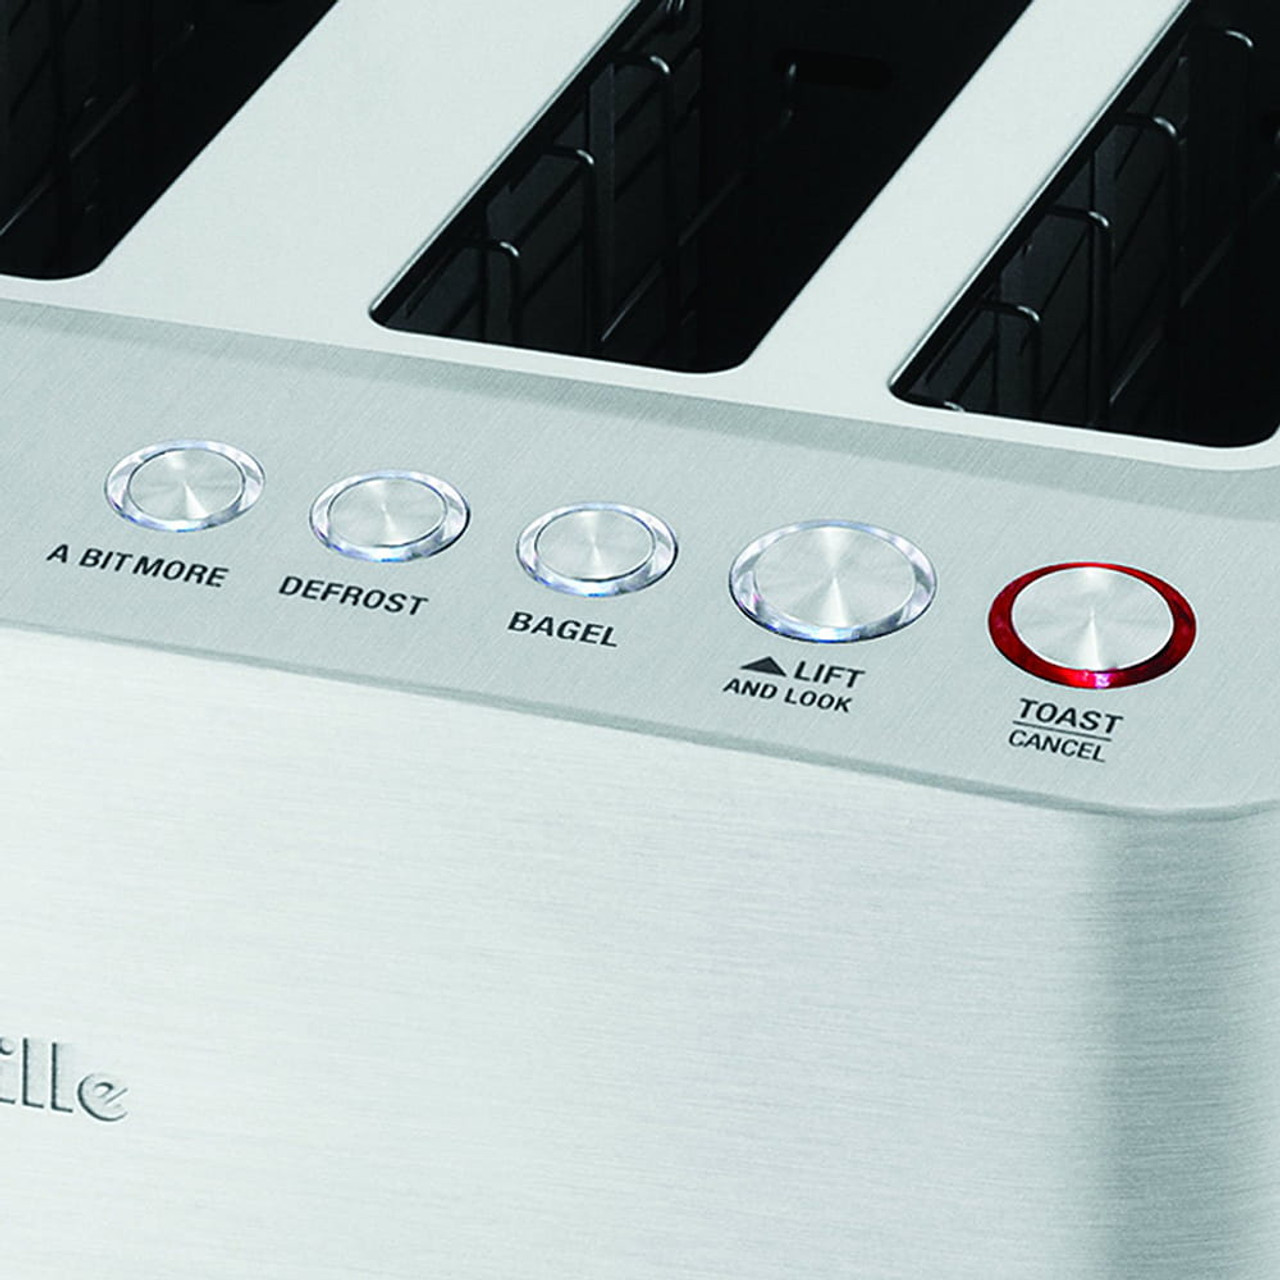 Breville Die-Cast Smart Toaster Review: Smart, but Not a Genius